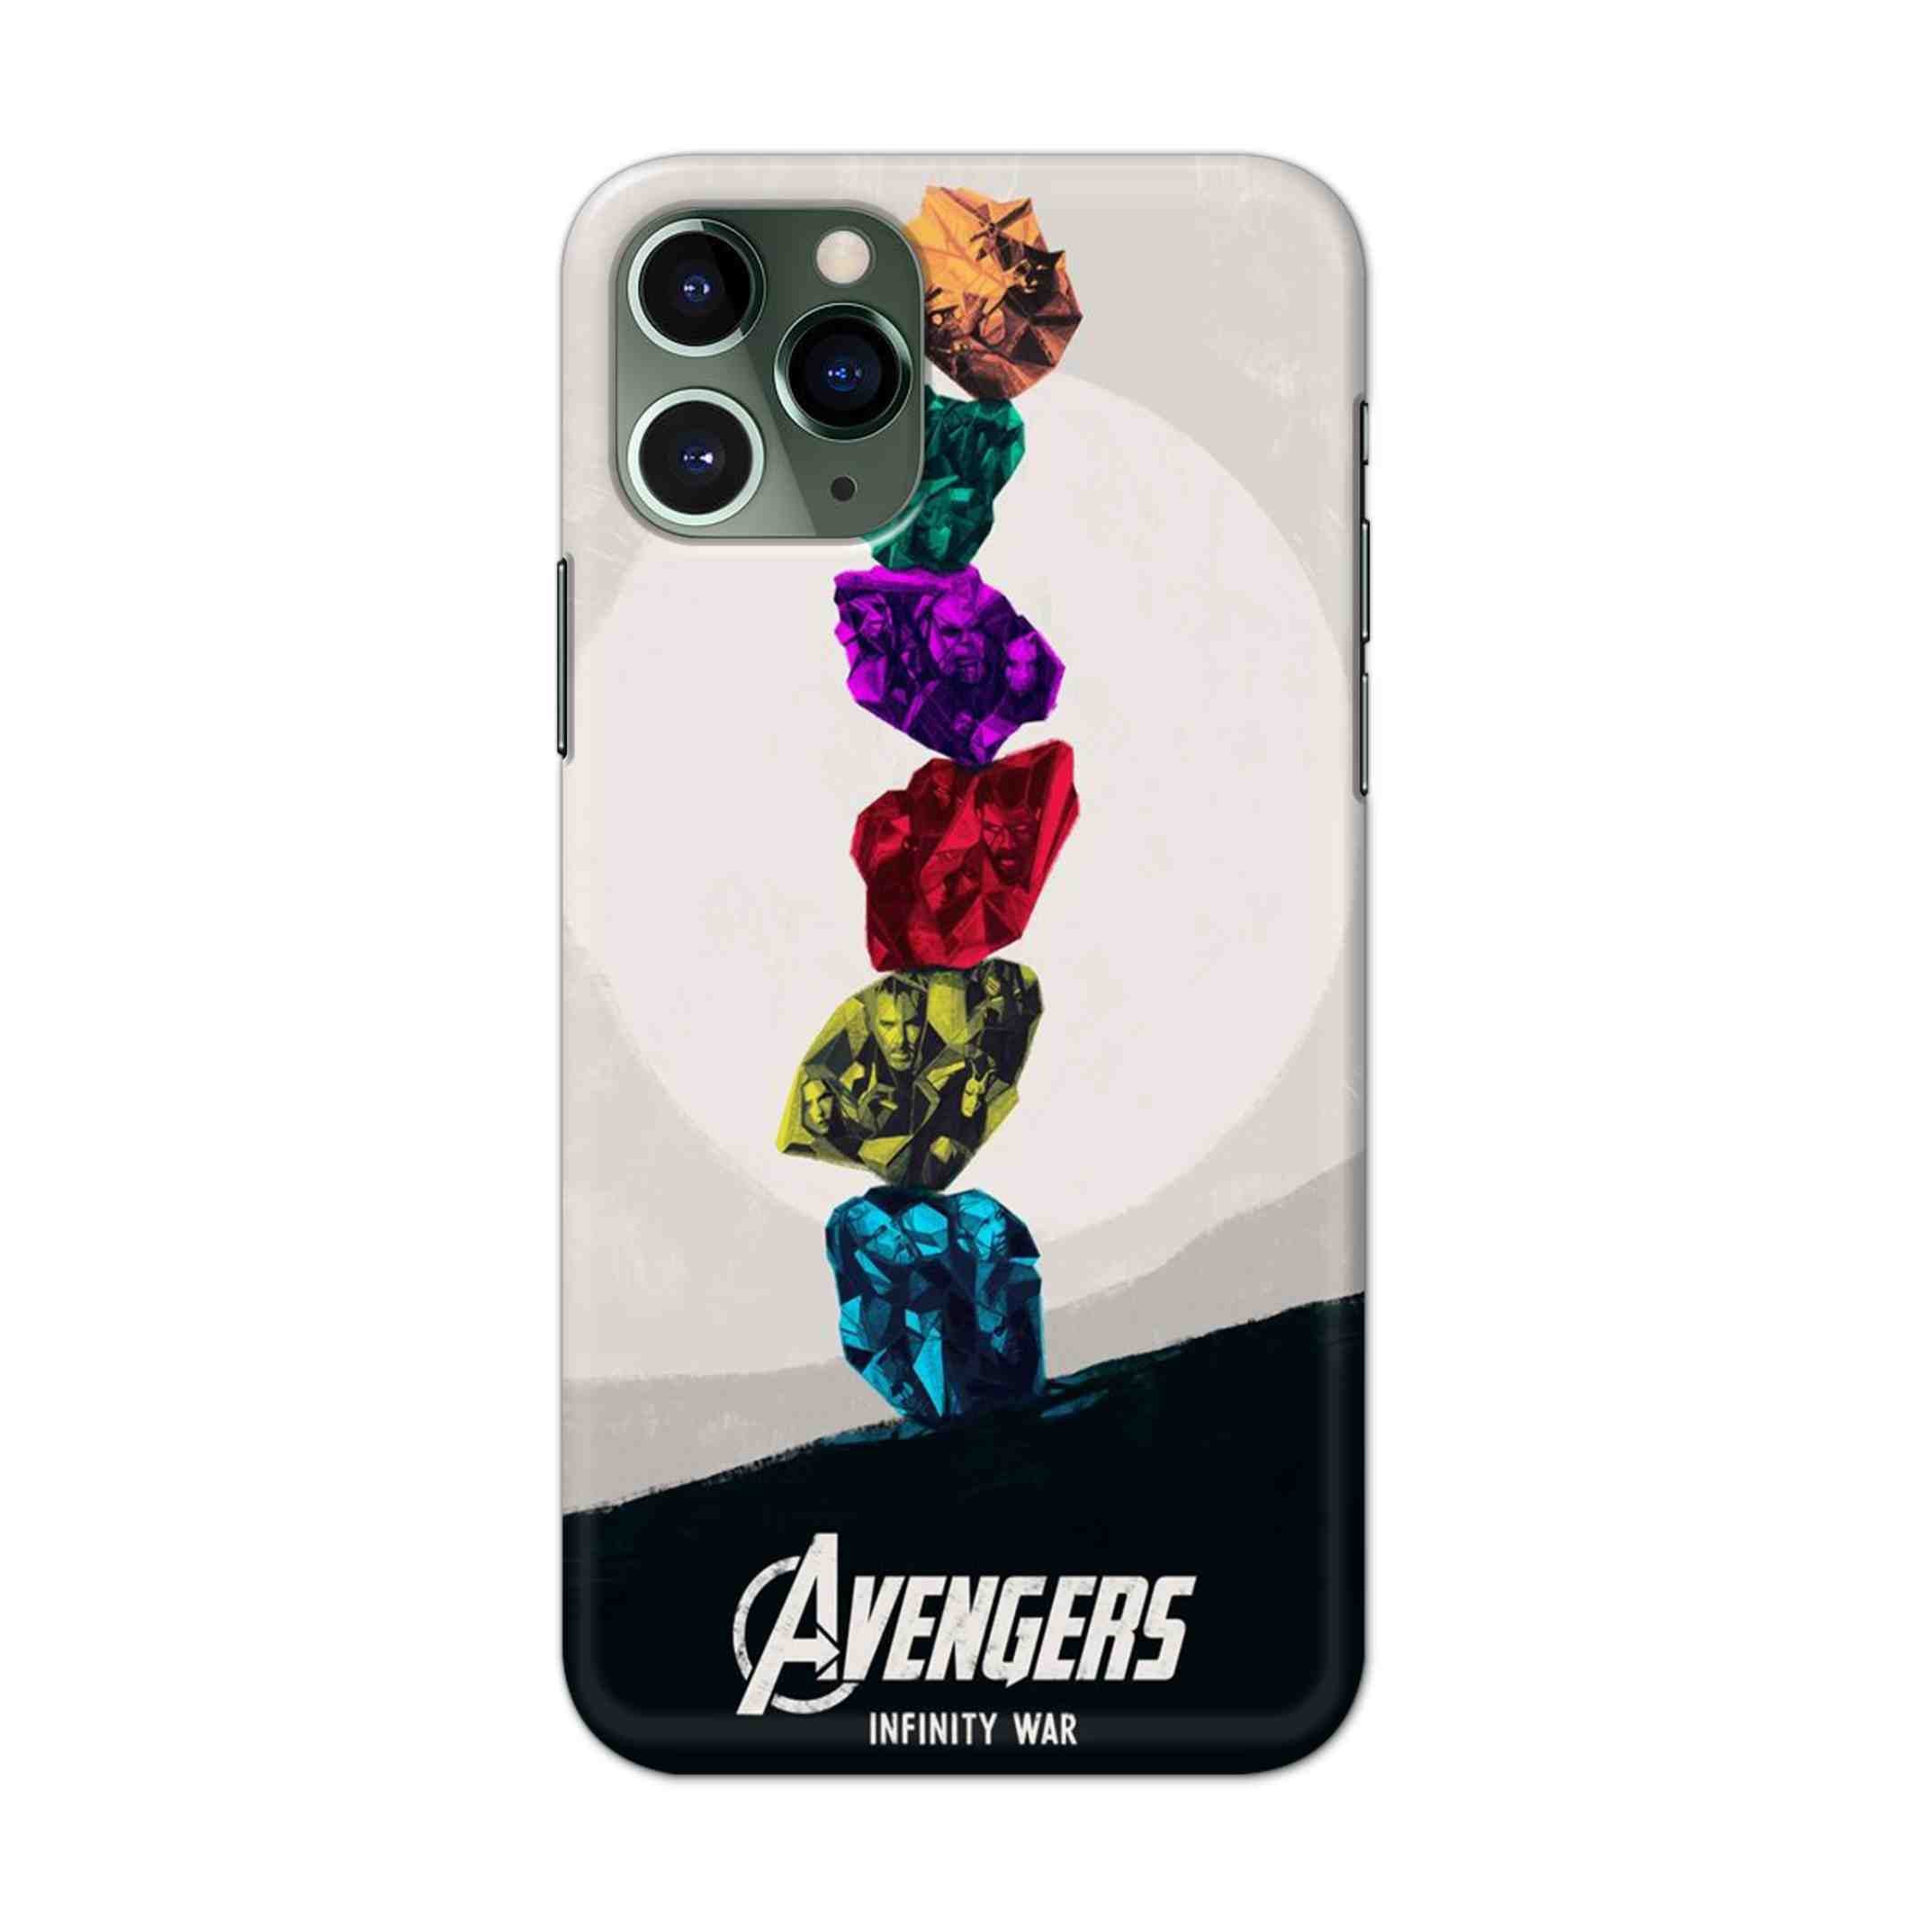 Buy Avengers Stone Hard Back Mobile Phone Case/Cover For iPhone 11 Pro Online